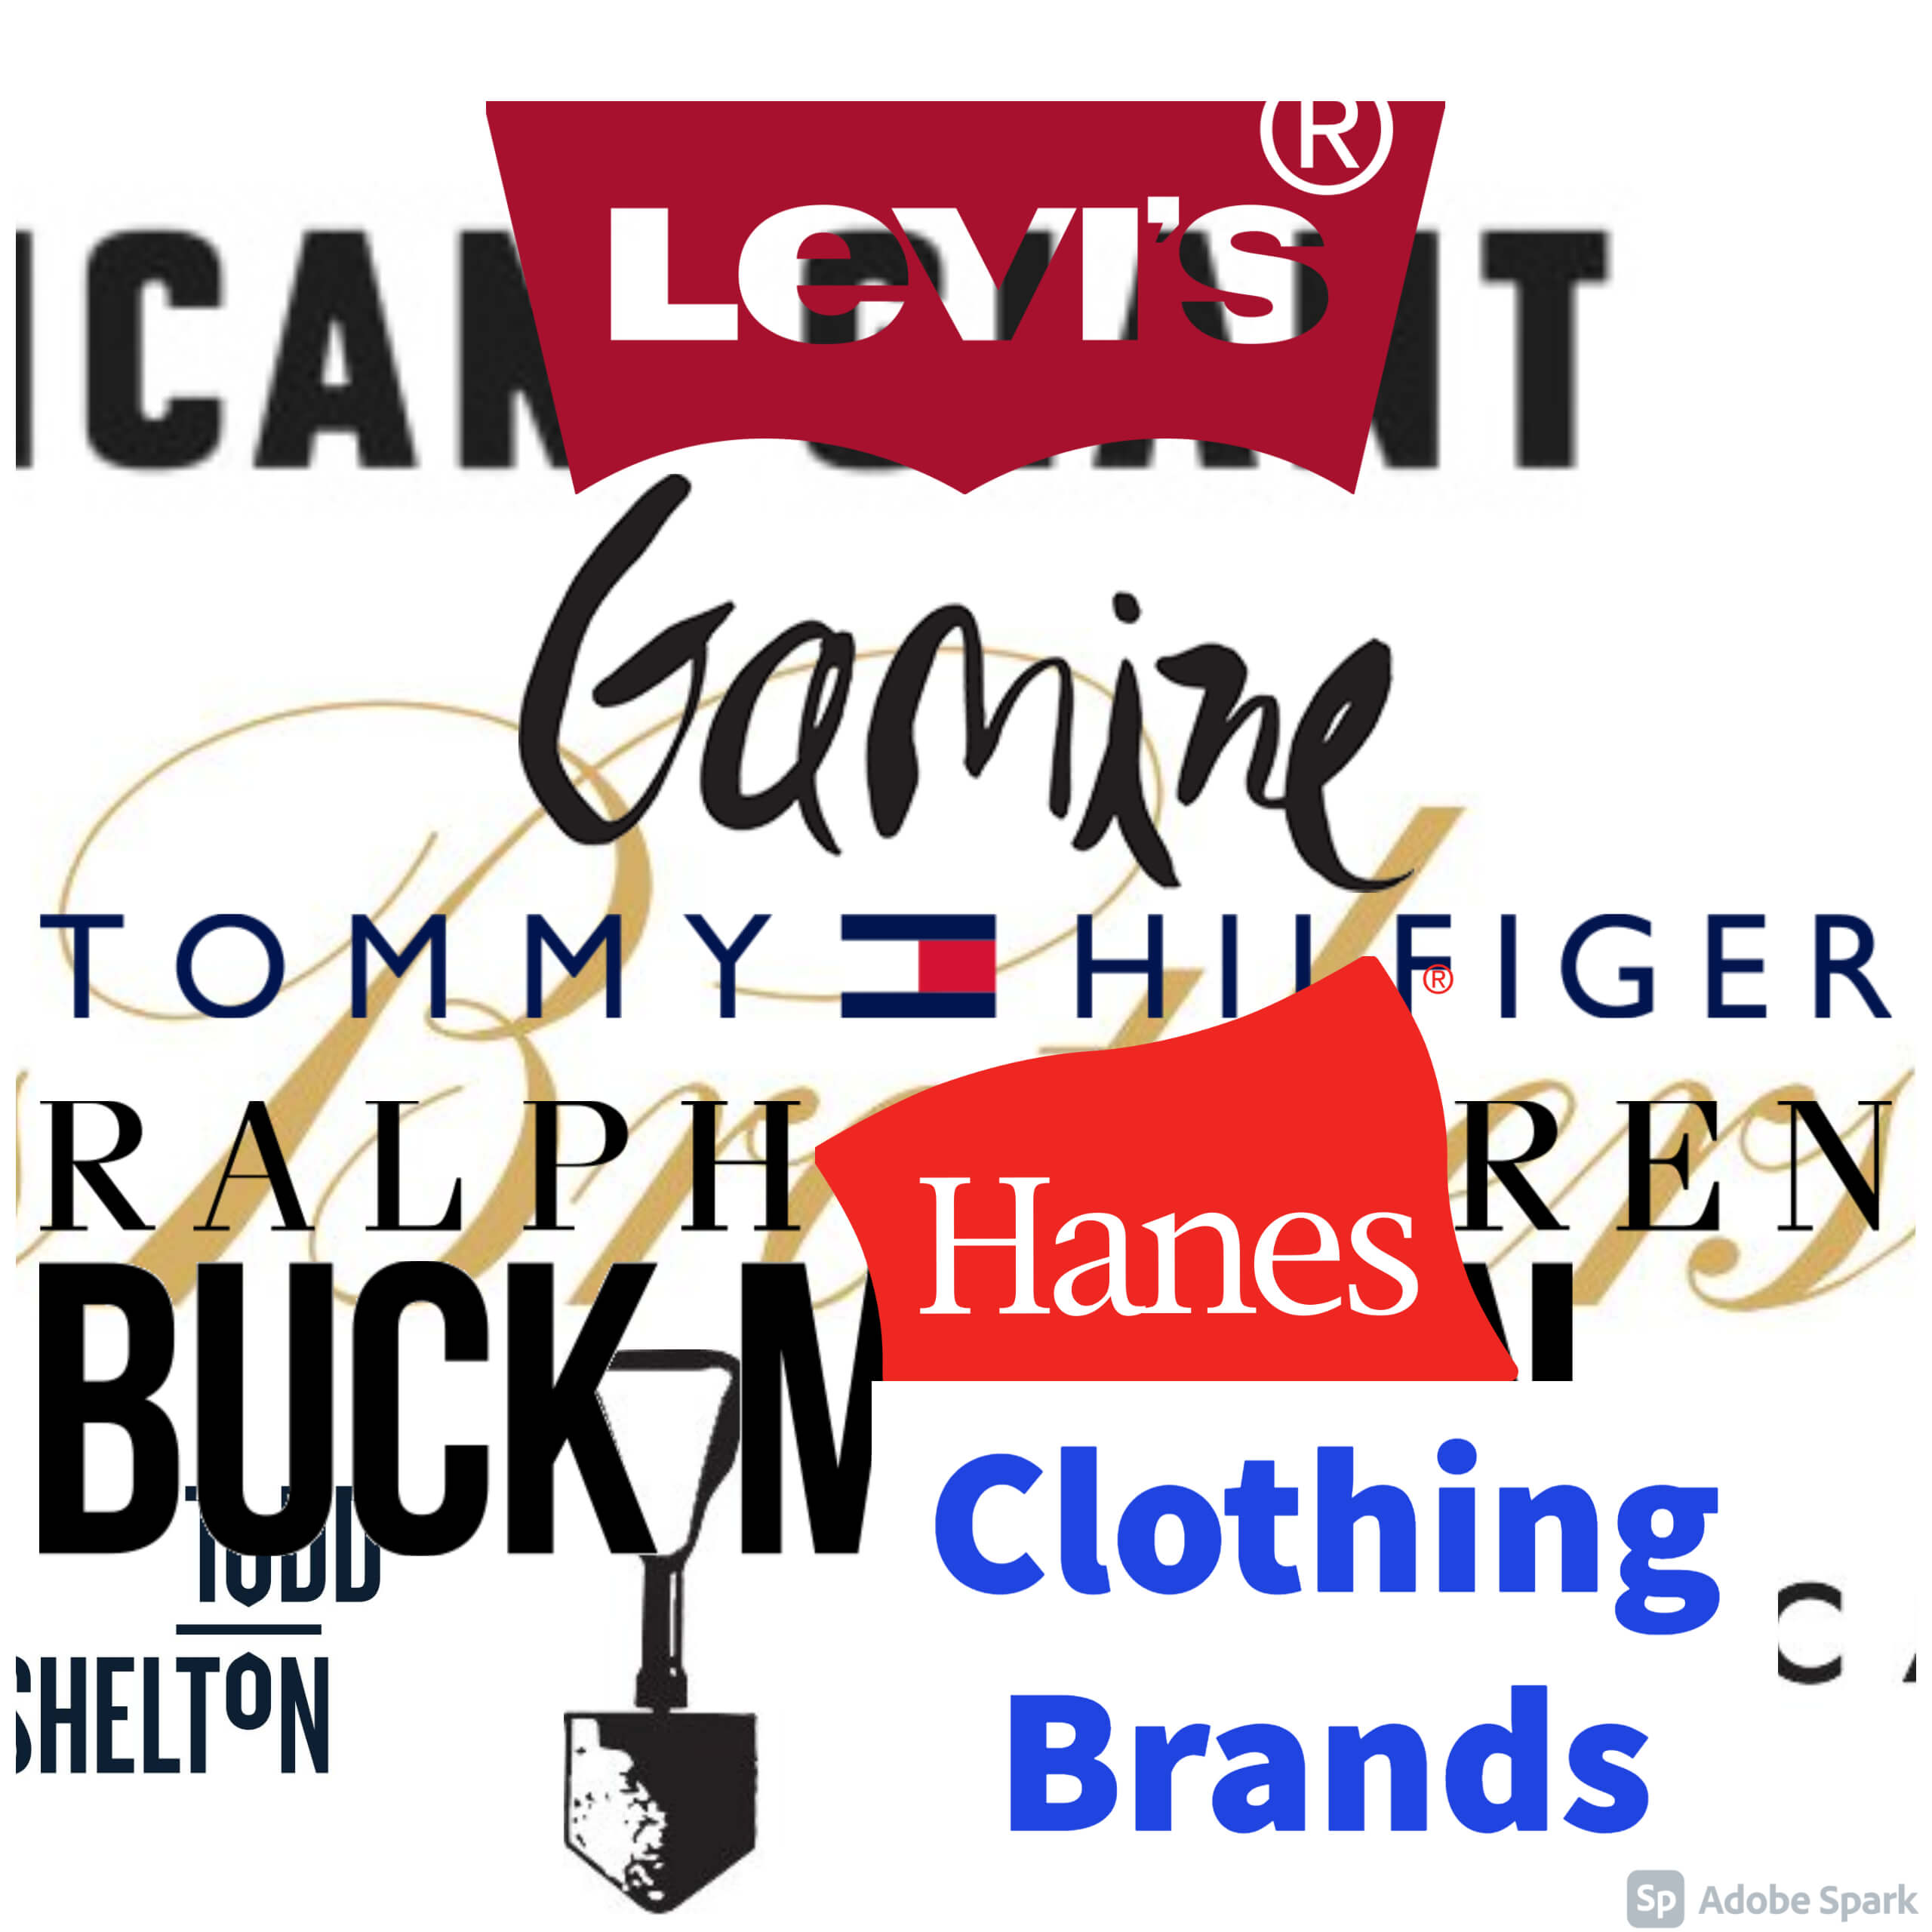 Clothing Brands